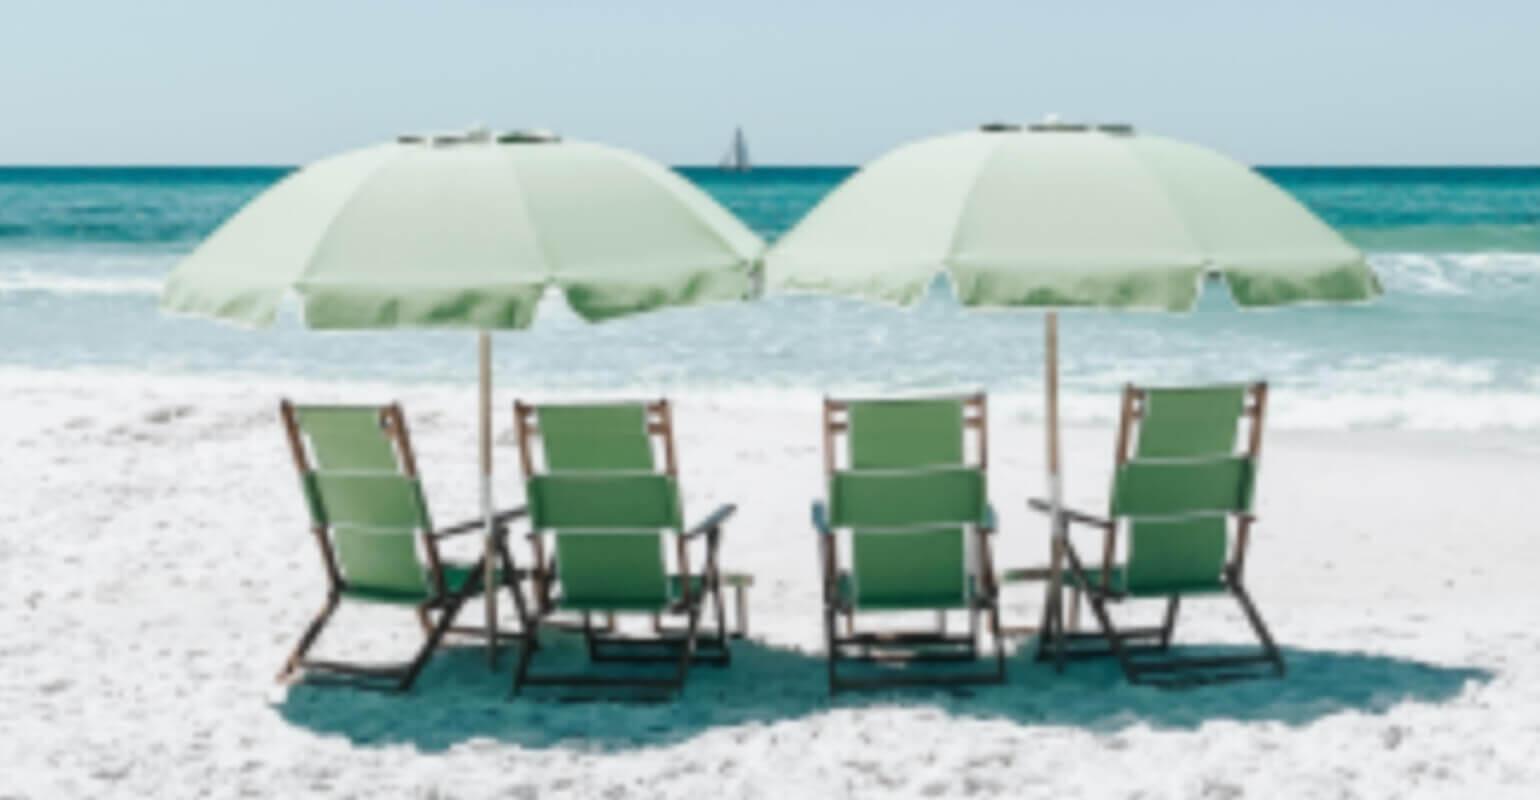 A small blurry photo of green chairs on sand